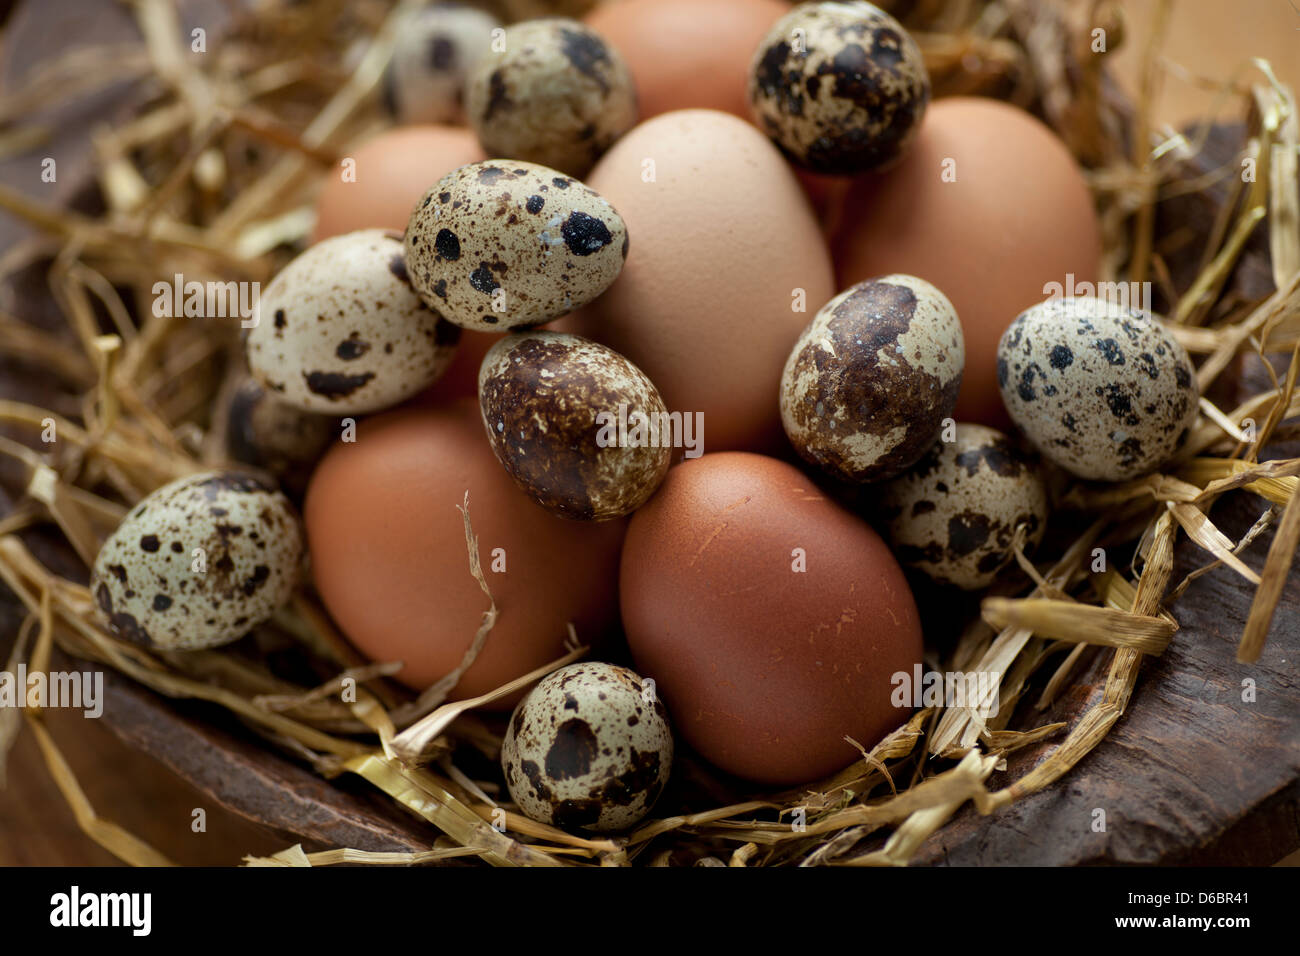 Farm Eggs in a Basket with Straw Stock Photo